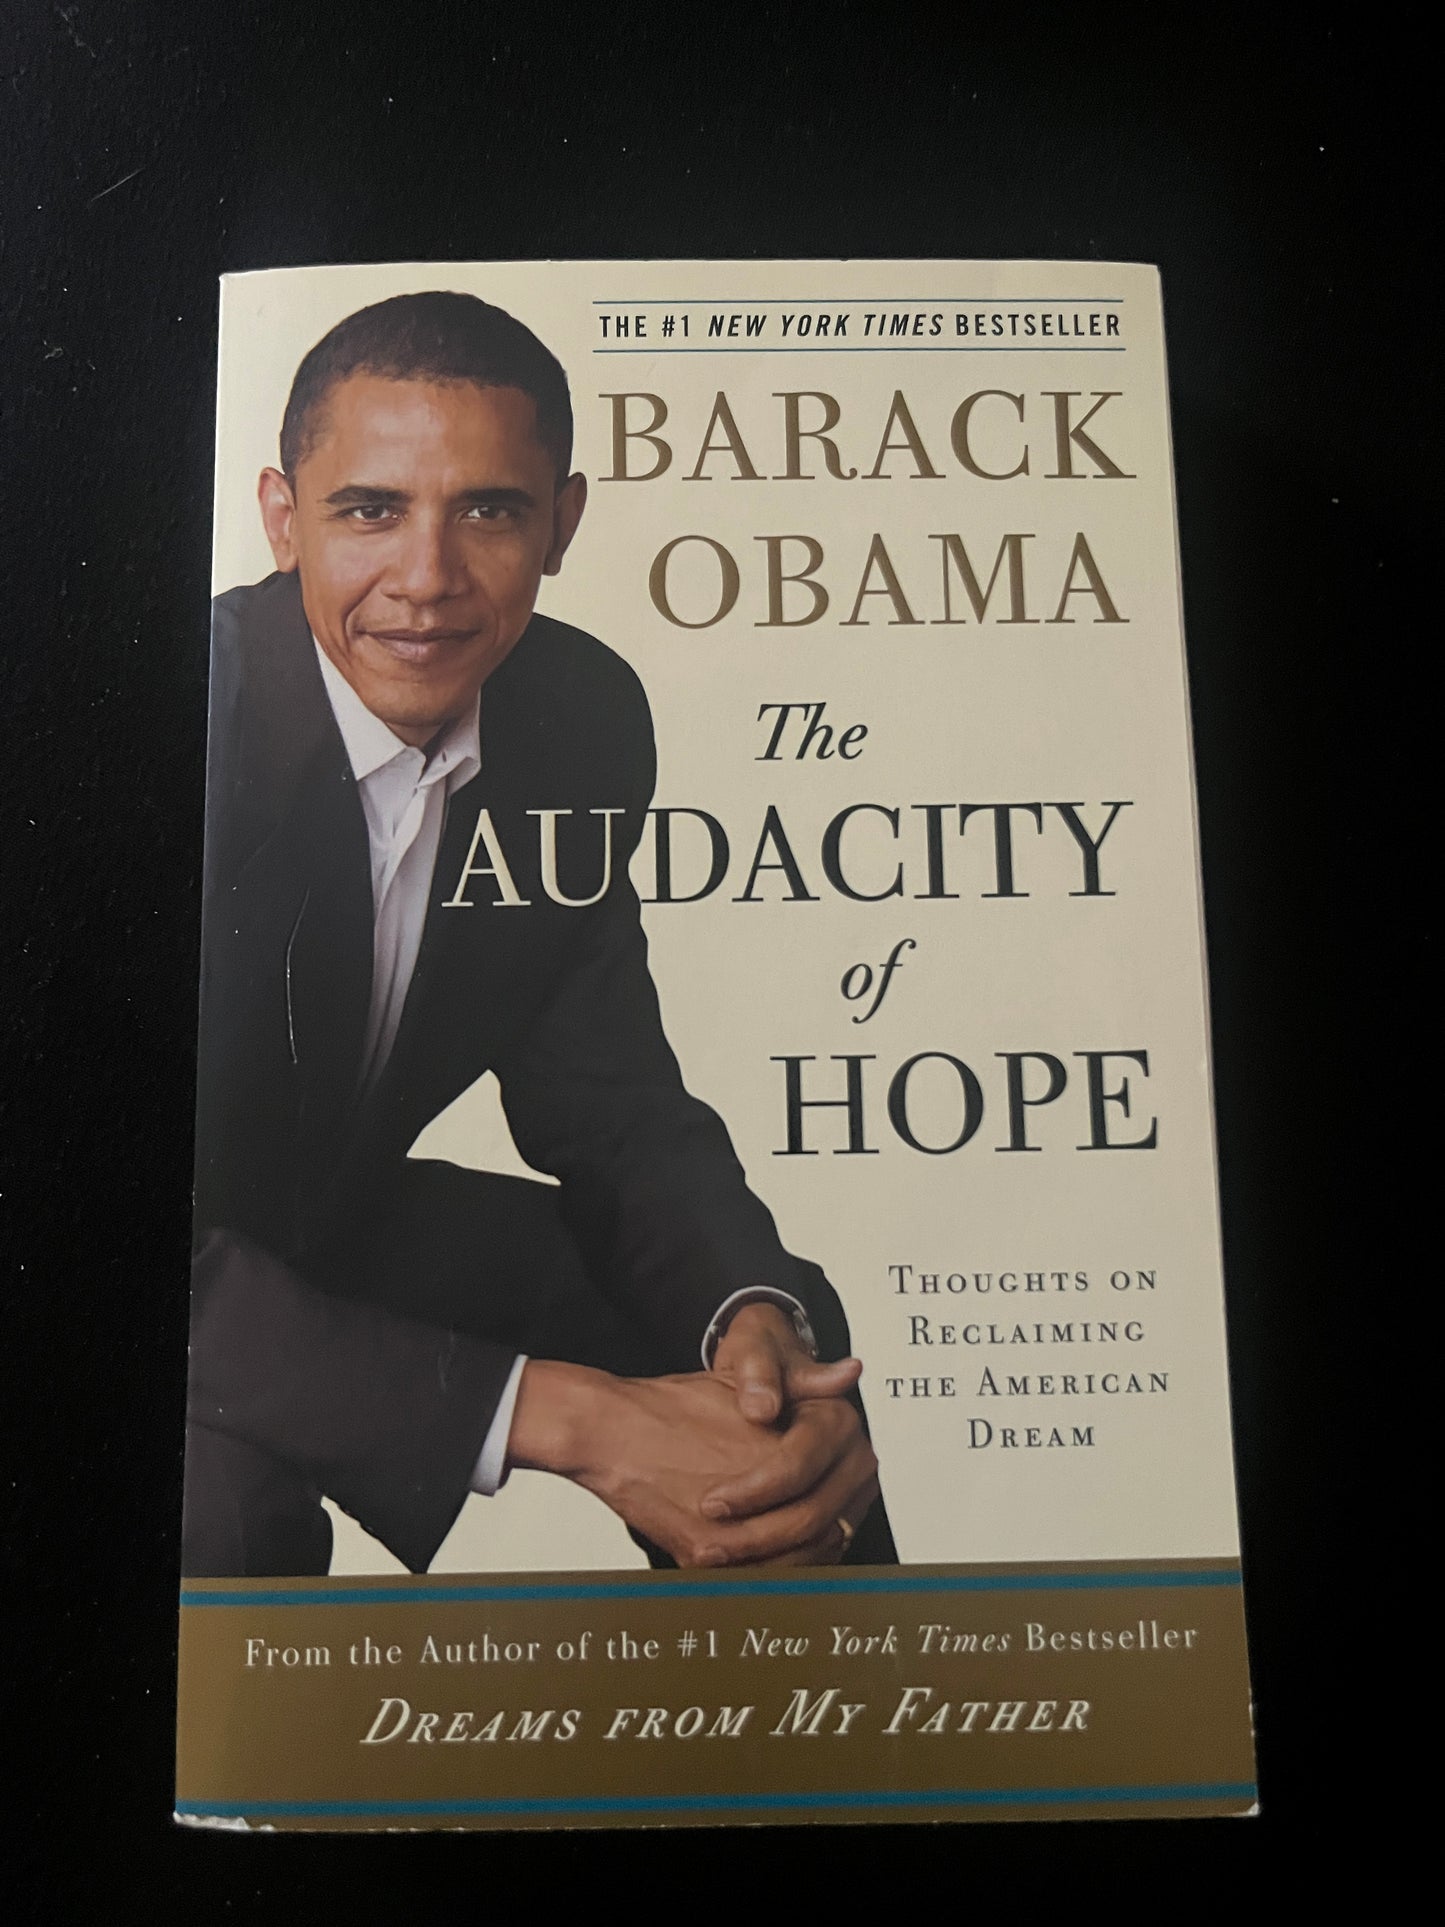 THE AUDACITY OF HOPE: Thoughts on Reclaiming the American Dream by Barak Obama